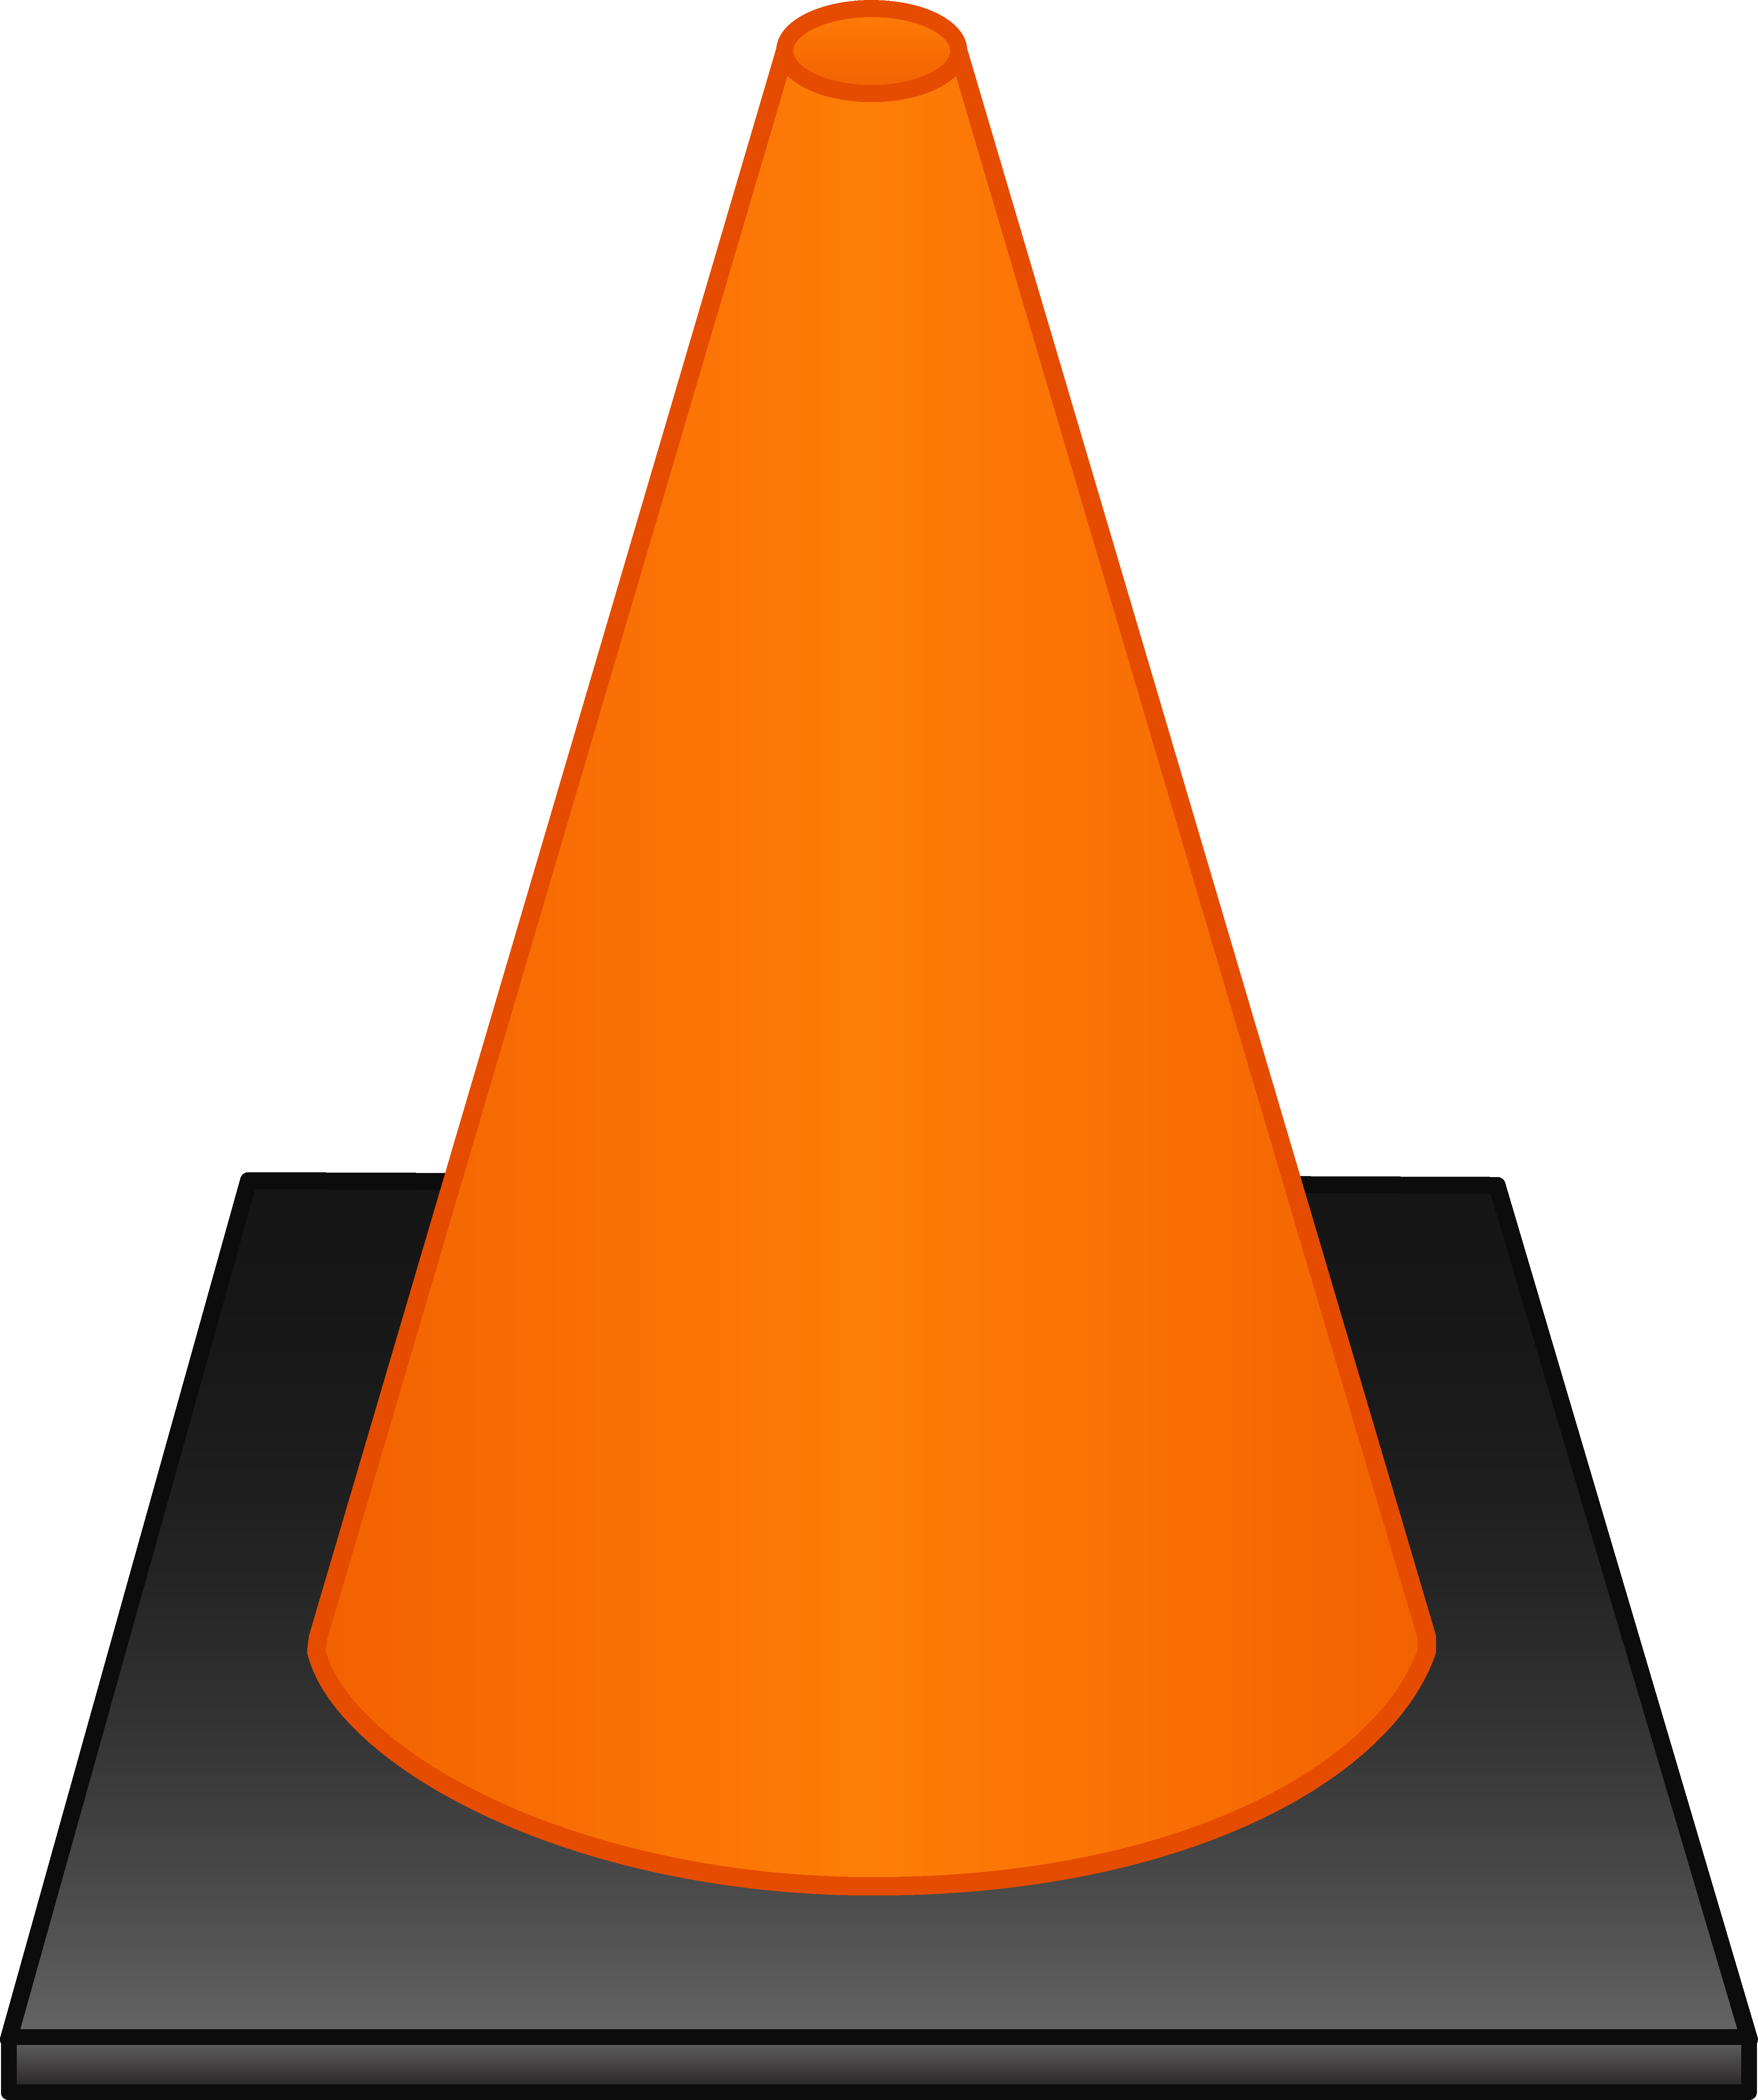 Construction cone clipart free clipart images